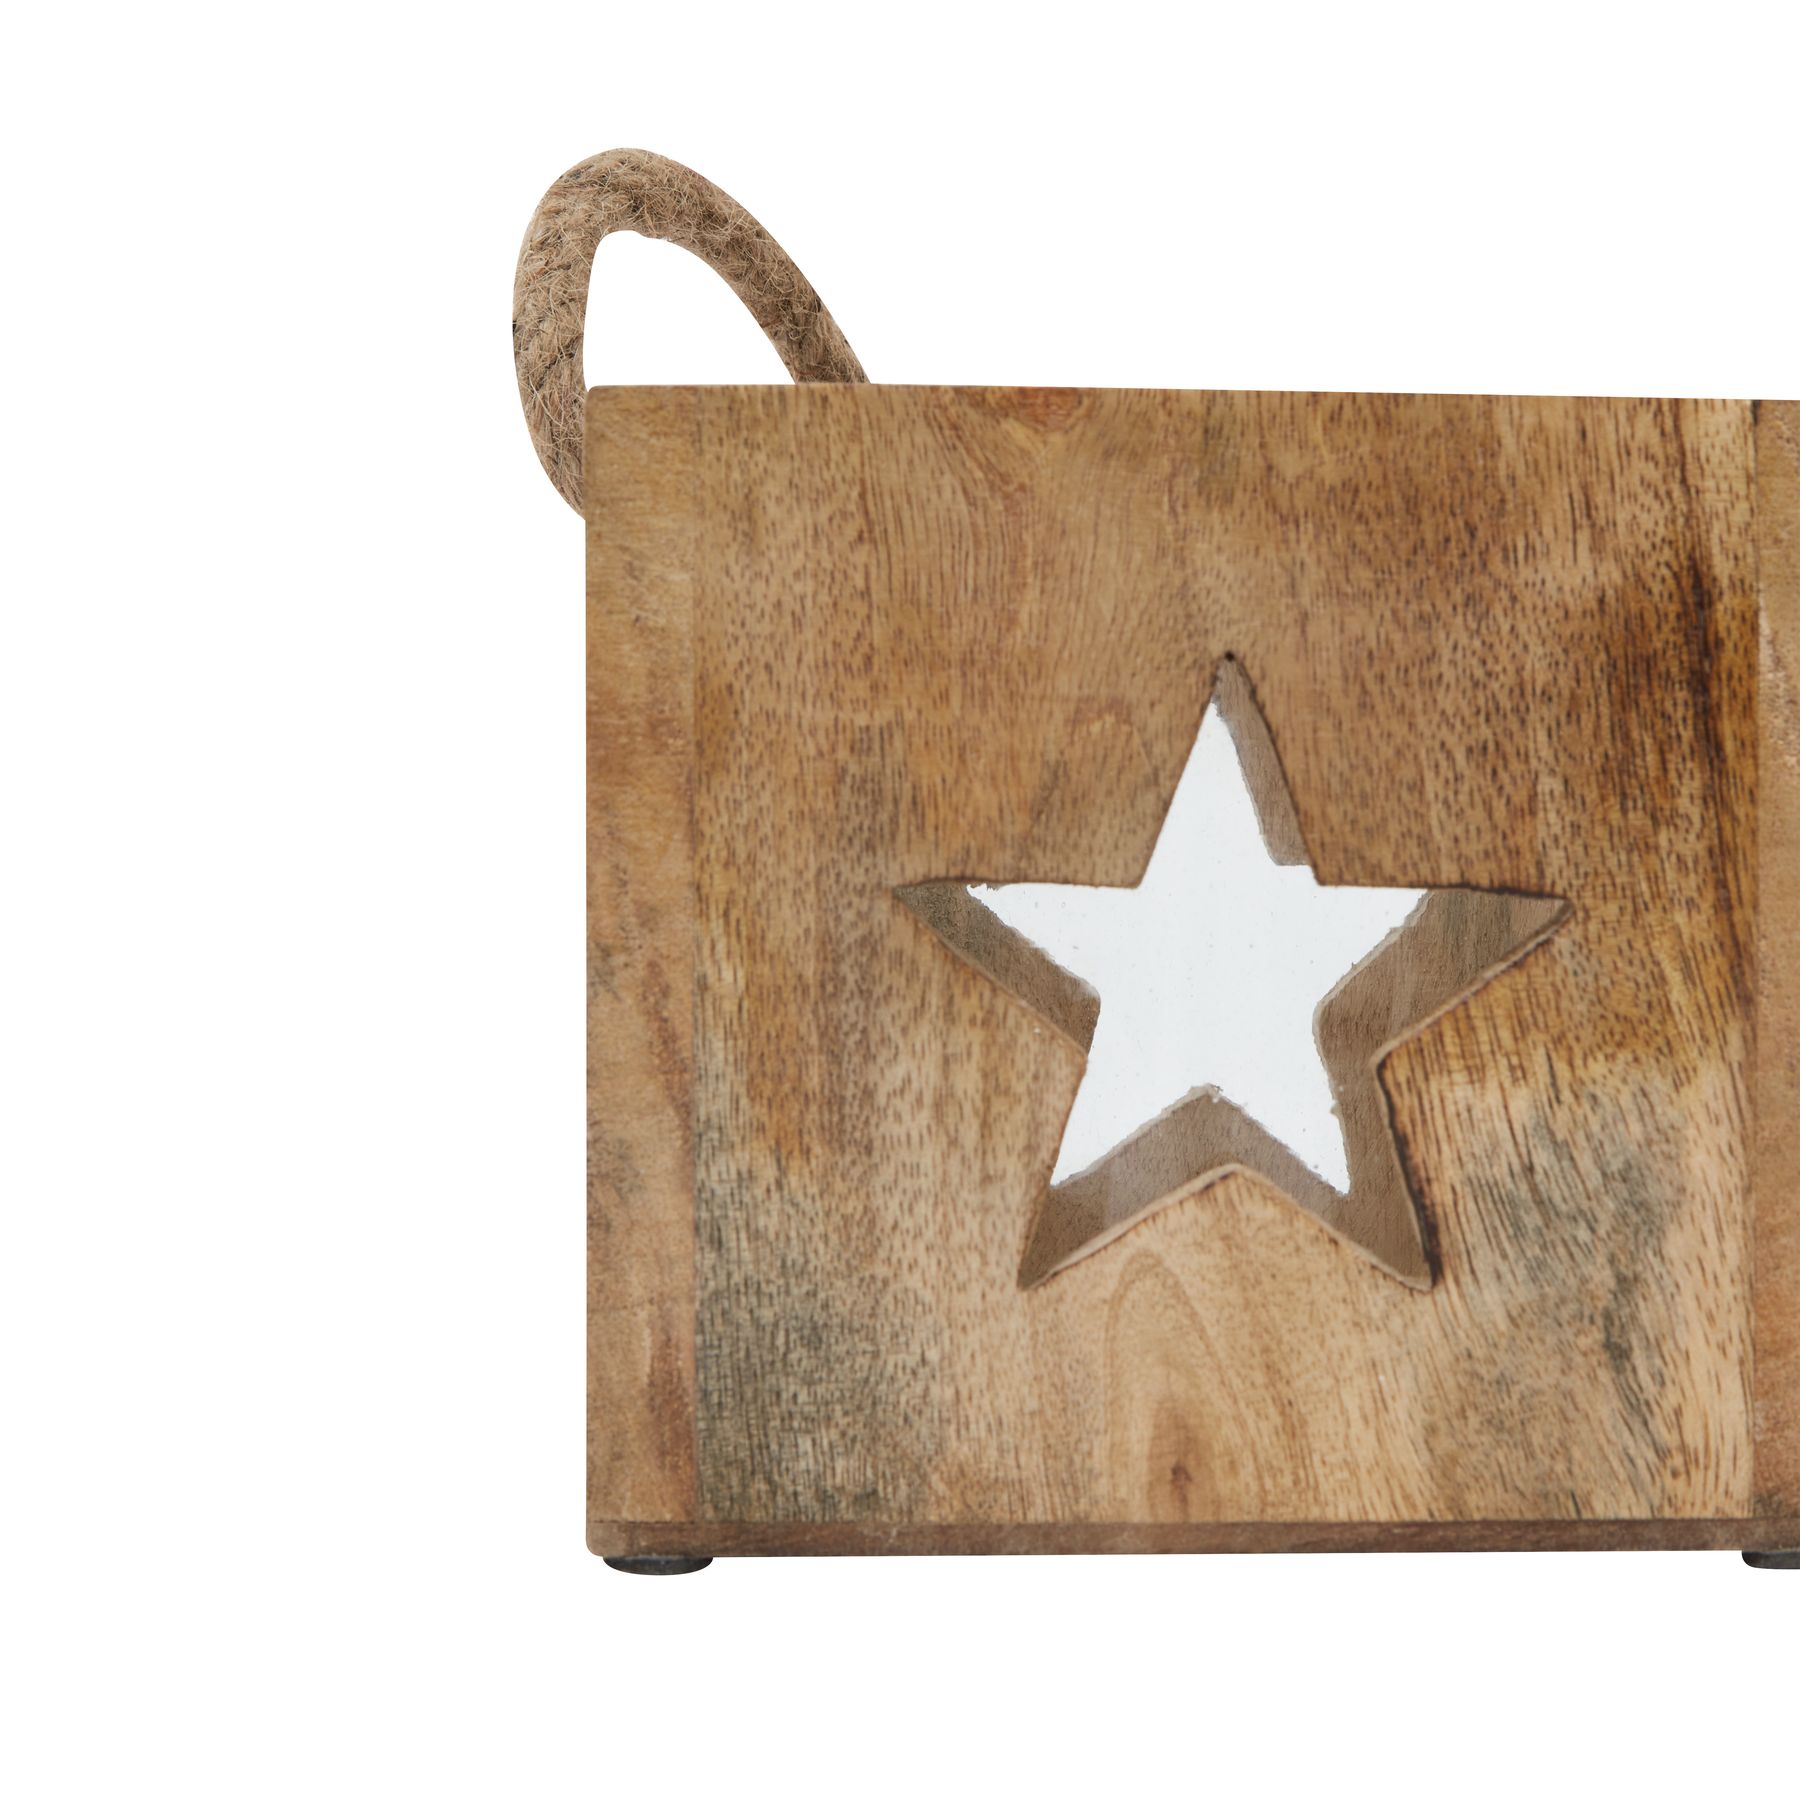 Natural Wooden Star Tealight Candle Holder - Image 3